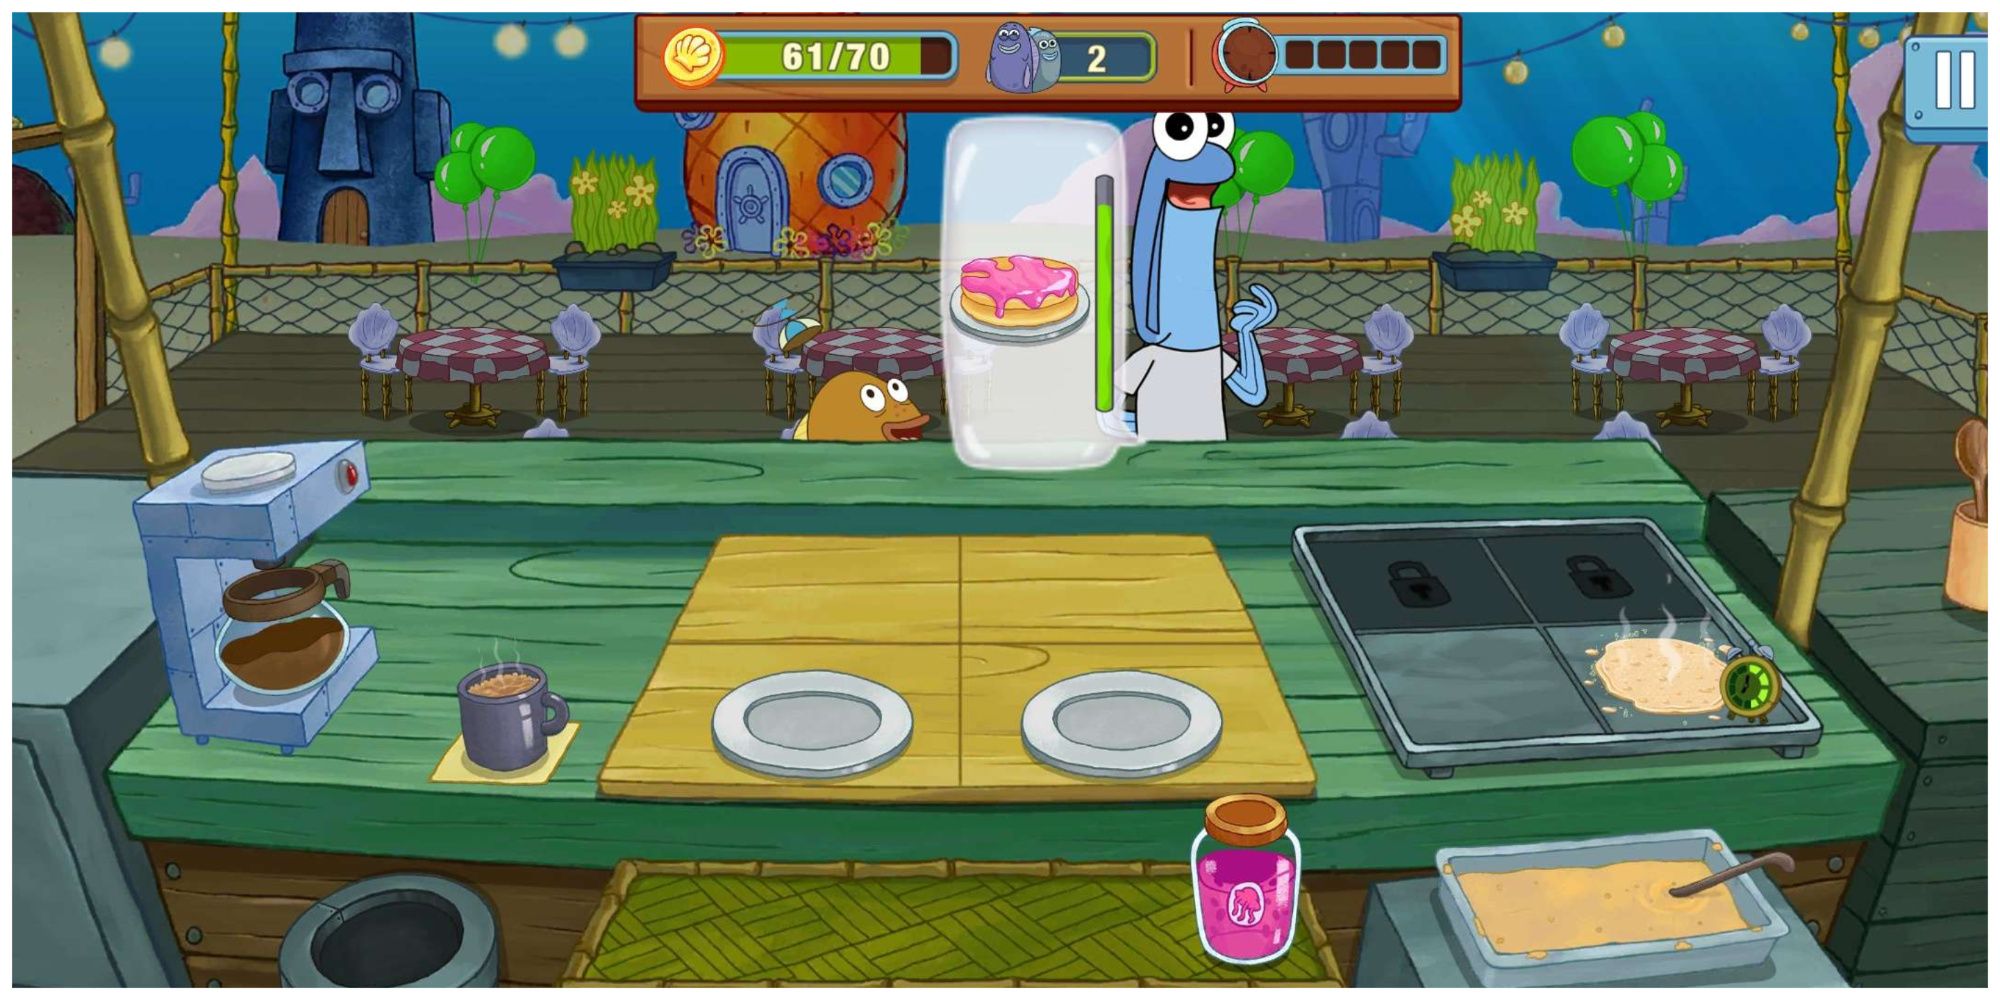 SpongeBob: Get Cooking, blue fish customer requesting pancakes with pink jelly